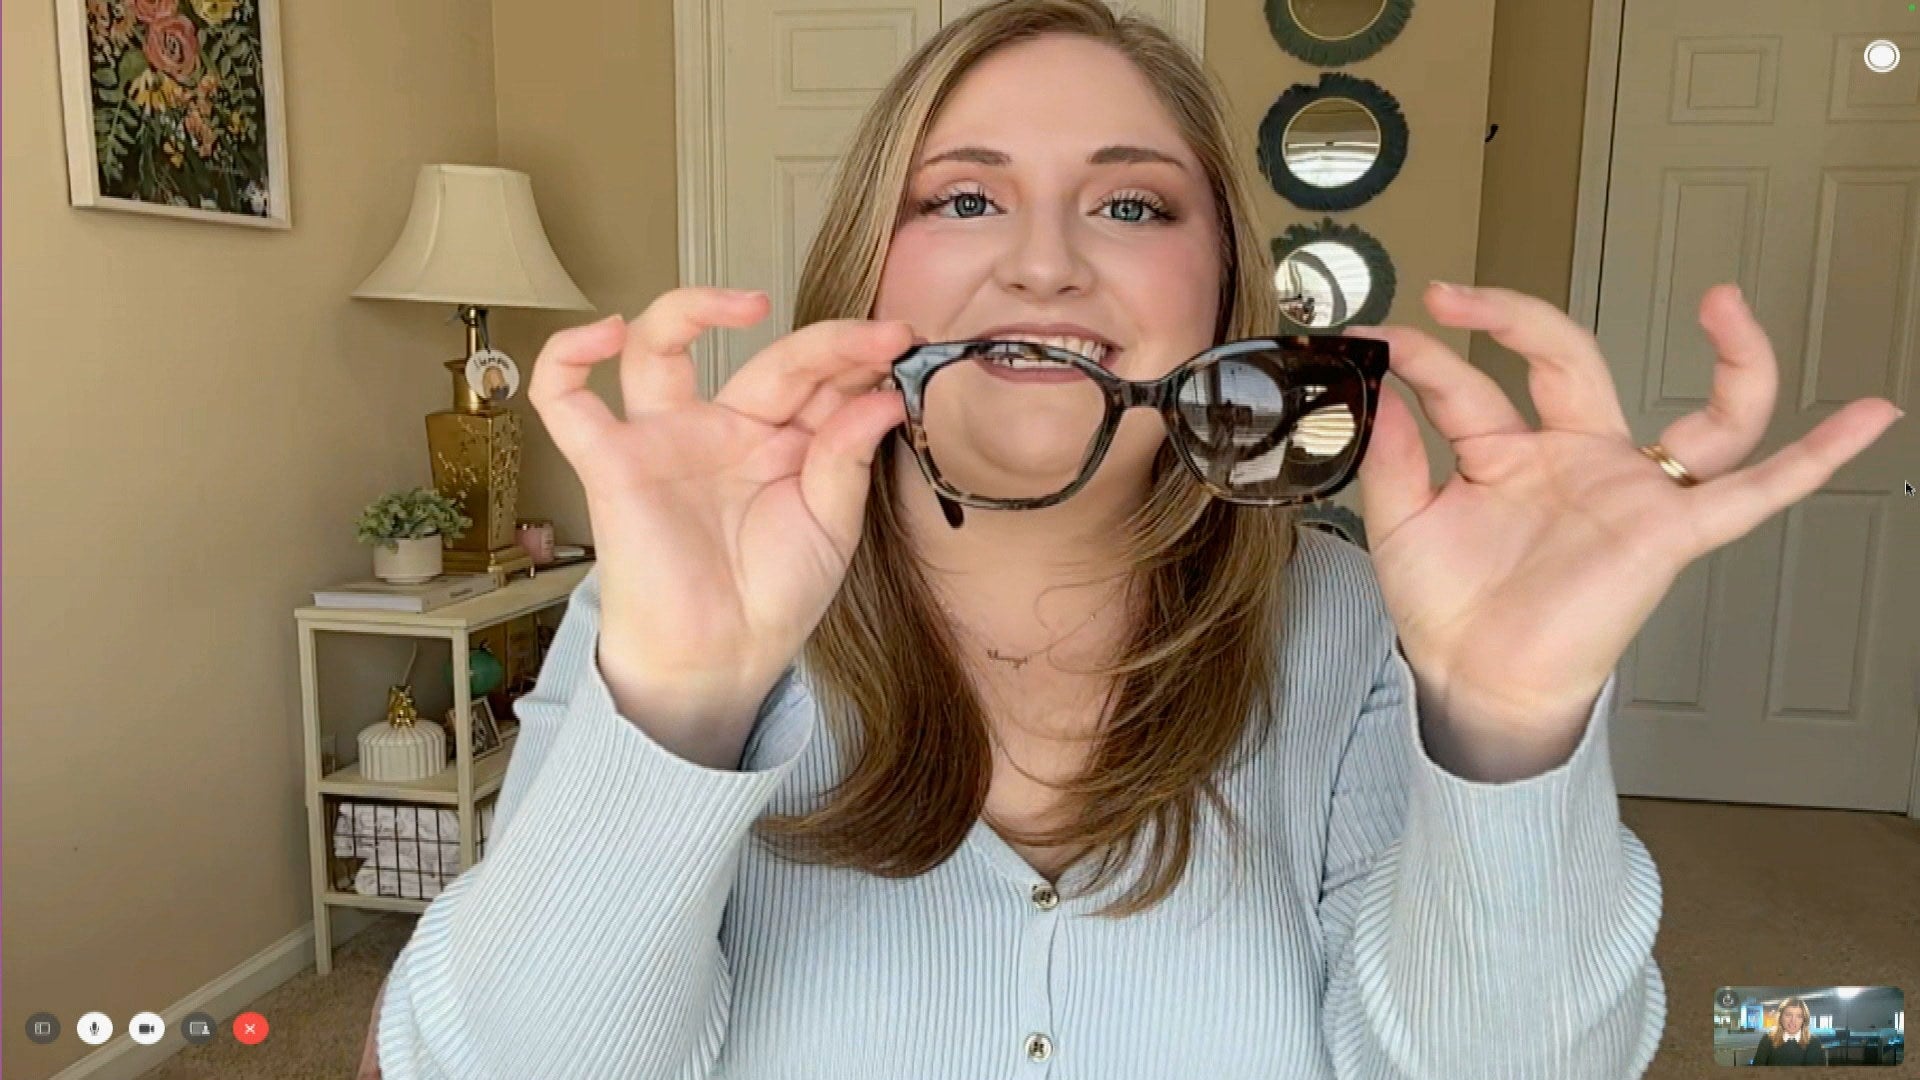 Woman Creates Shatter-Resistant Sunglasses After Losing Eye in Car